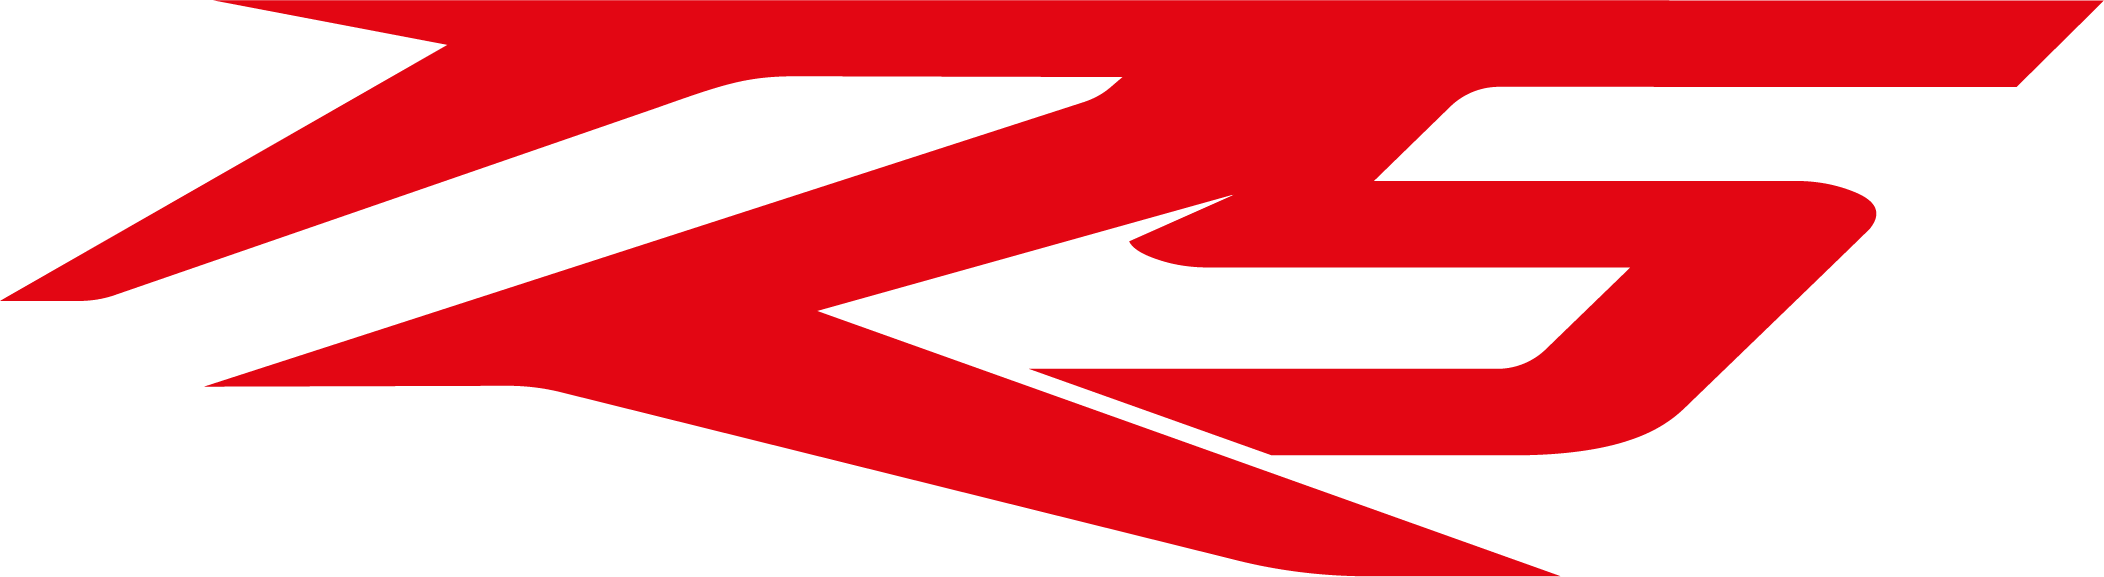 rs-logo.png